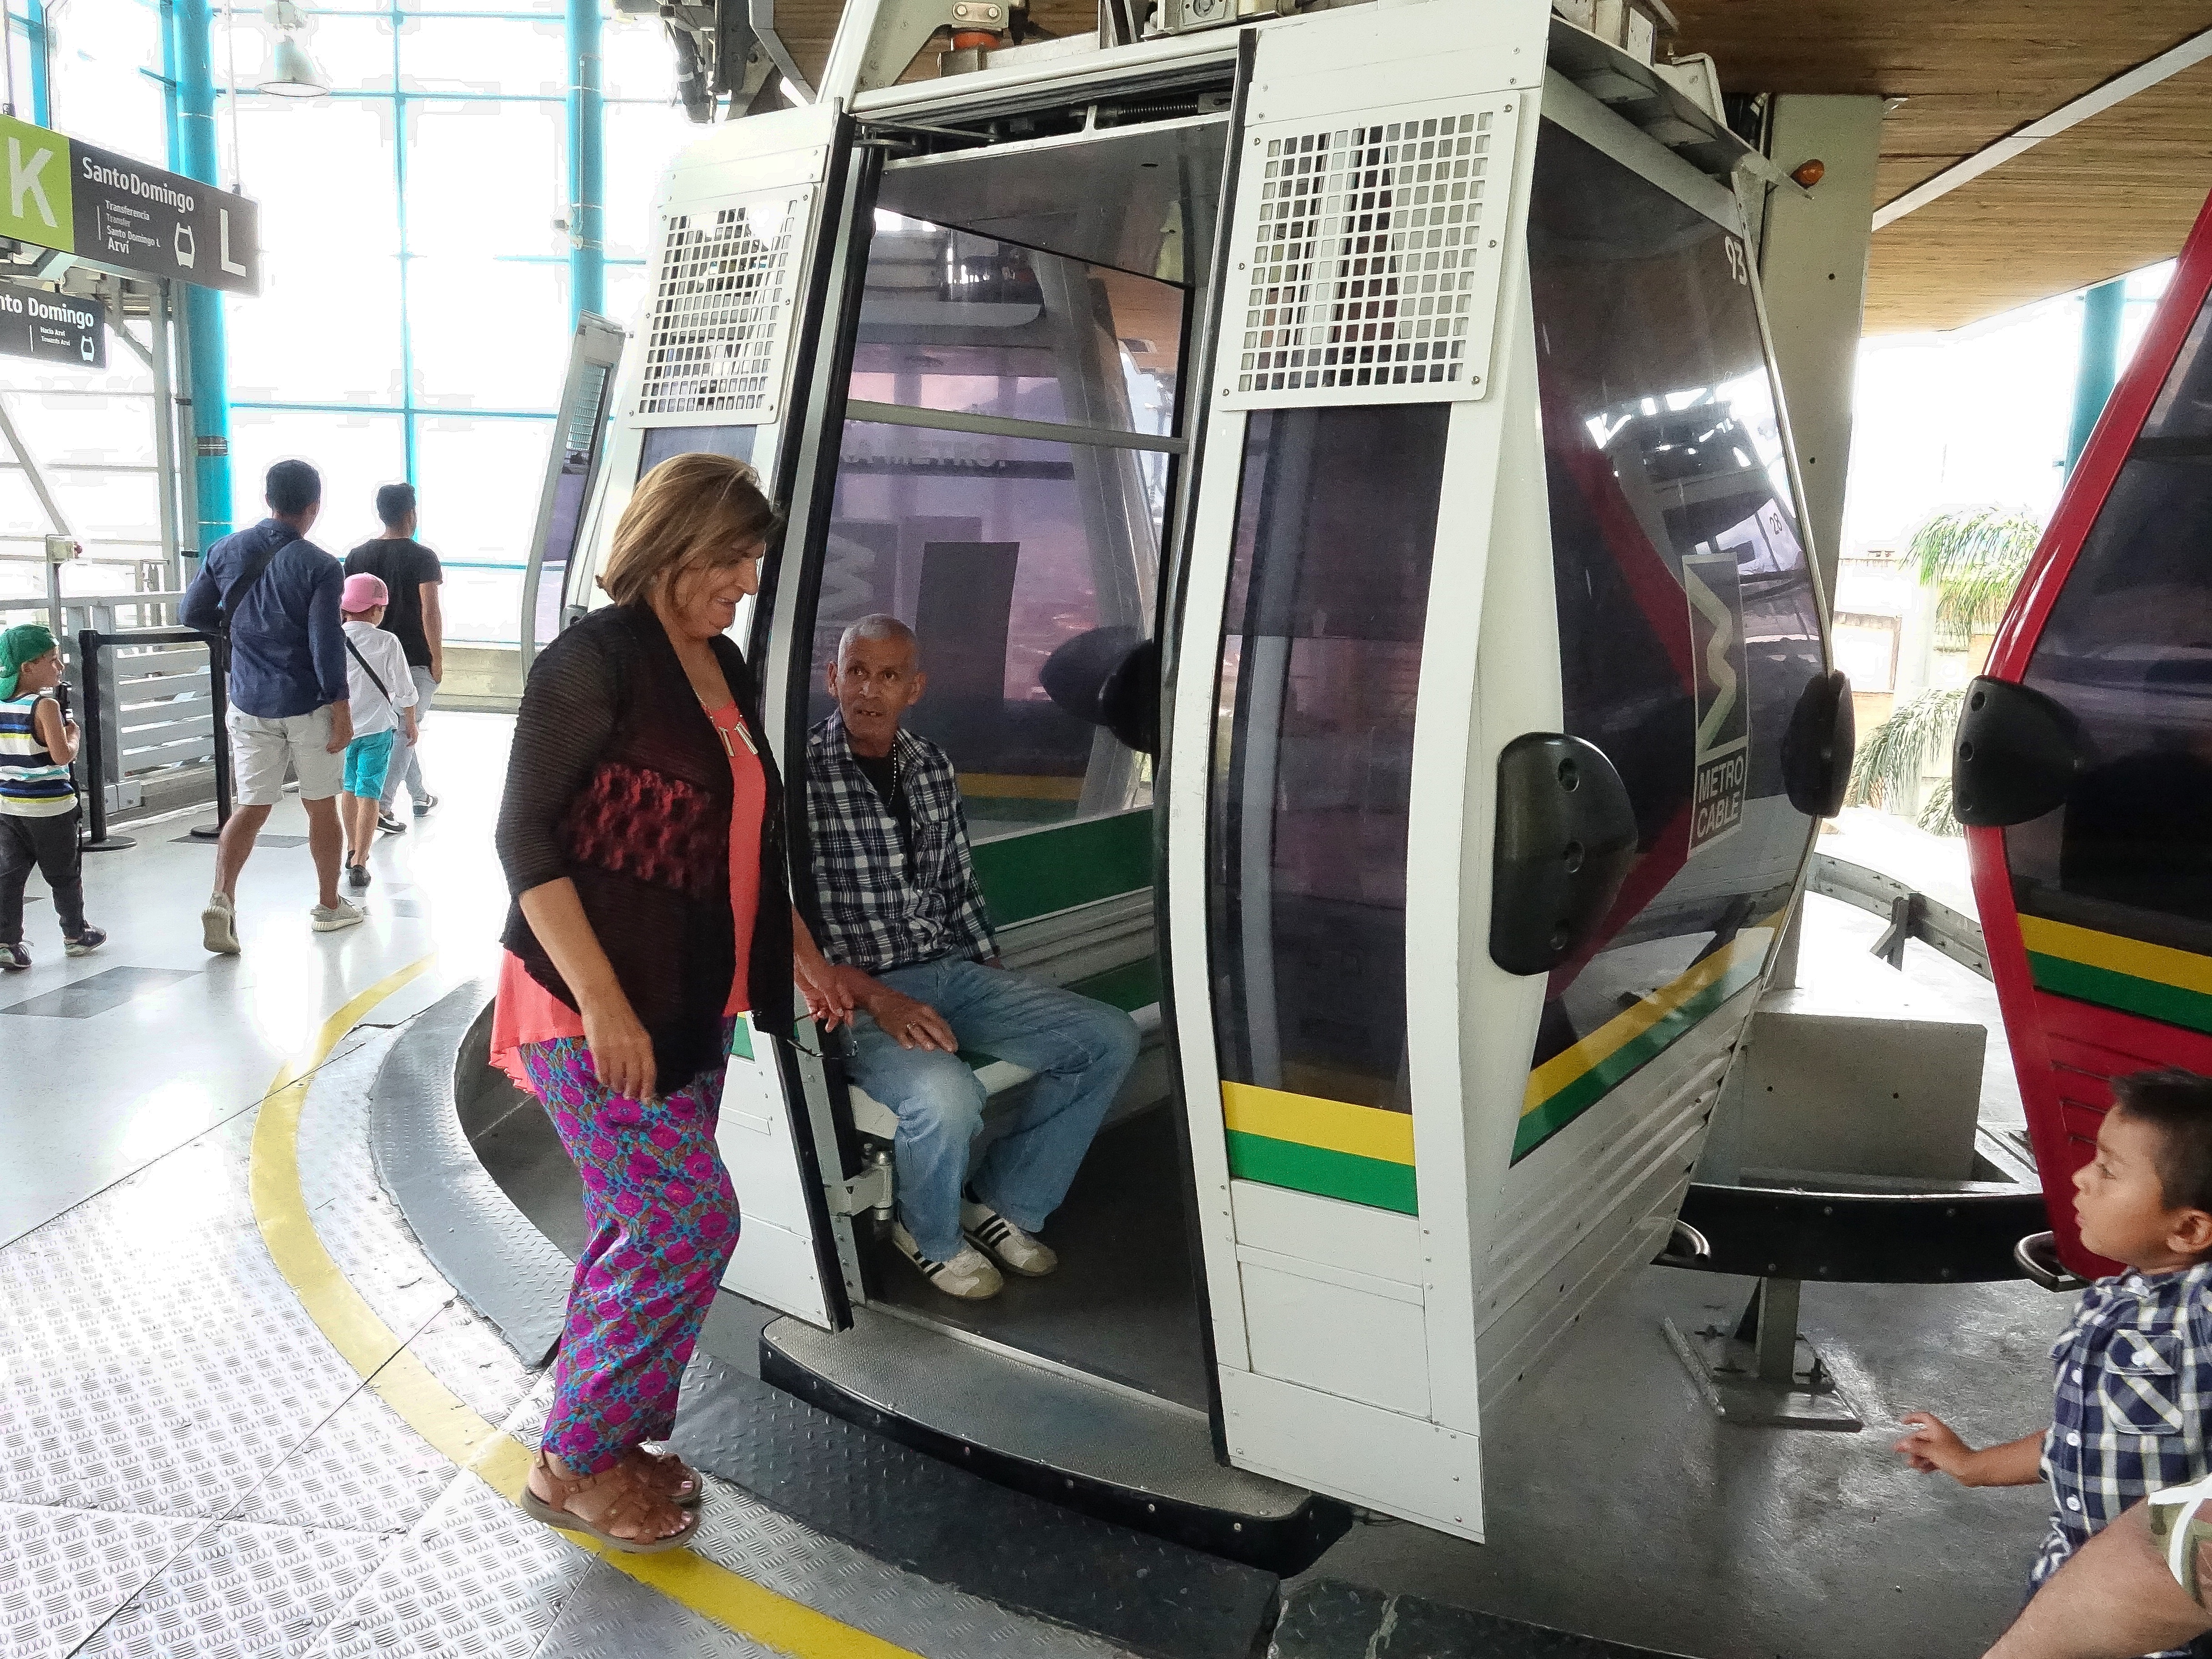 Very convenient, civilized, and easy to use cable car system back from Santo Domingo